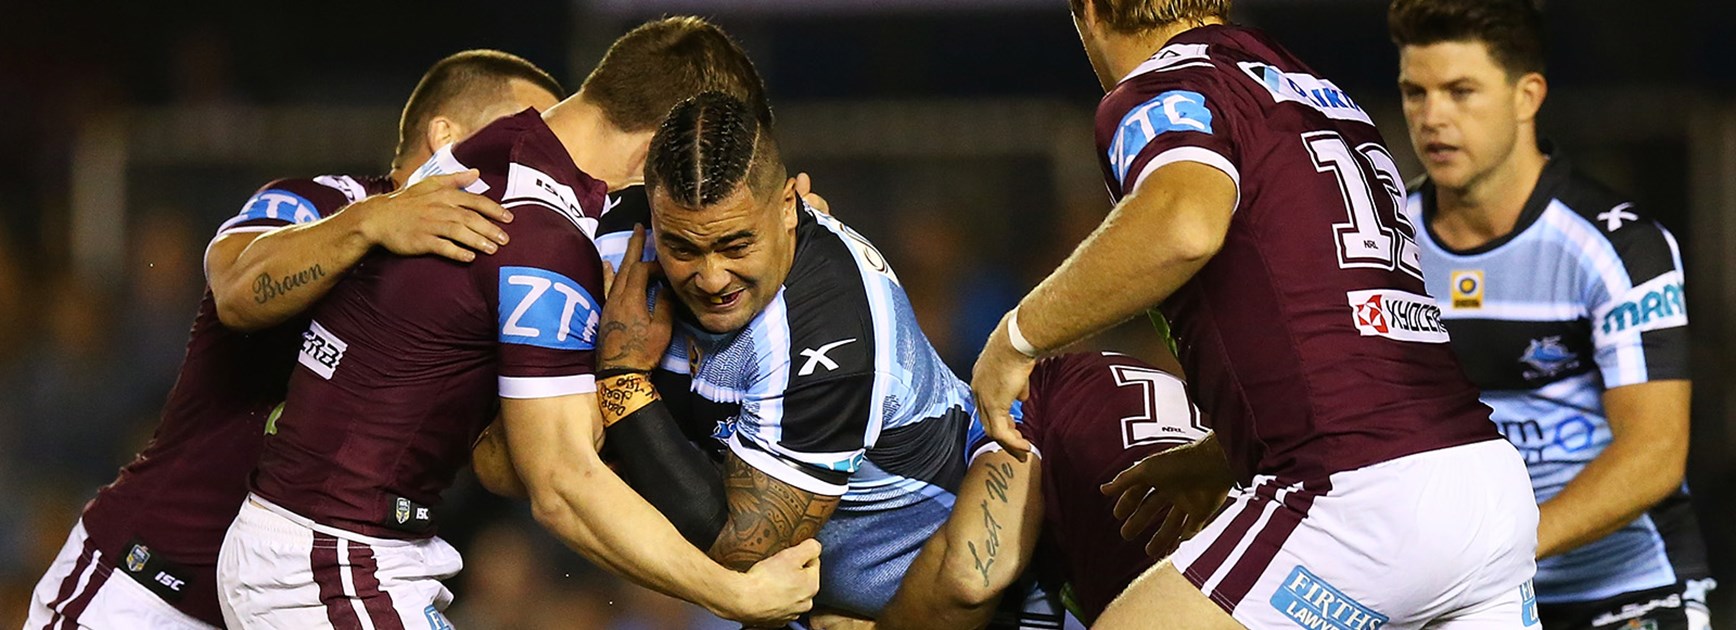 Andrew Fifita had a massive start against Manly in Round 11.